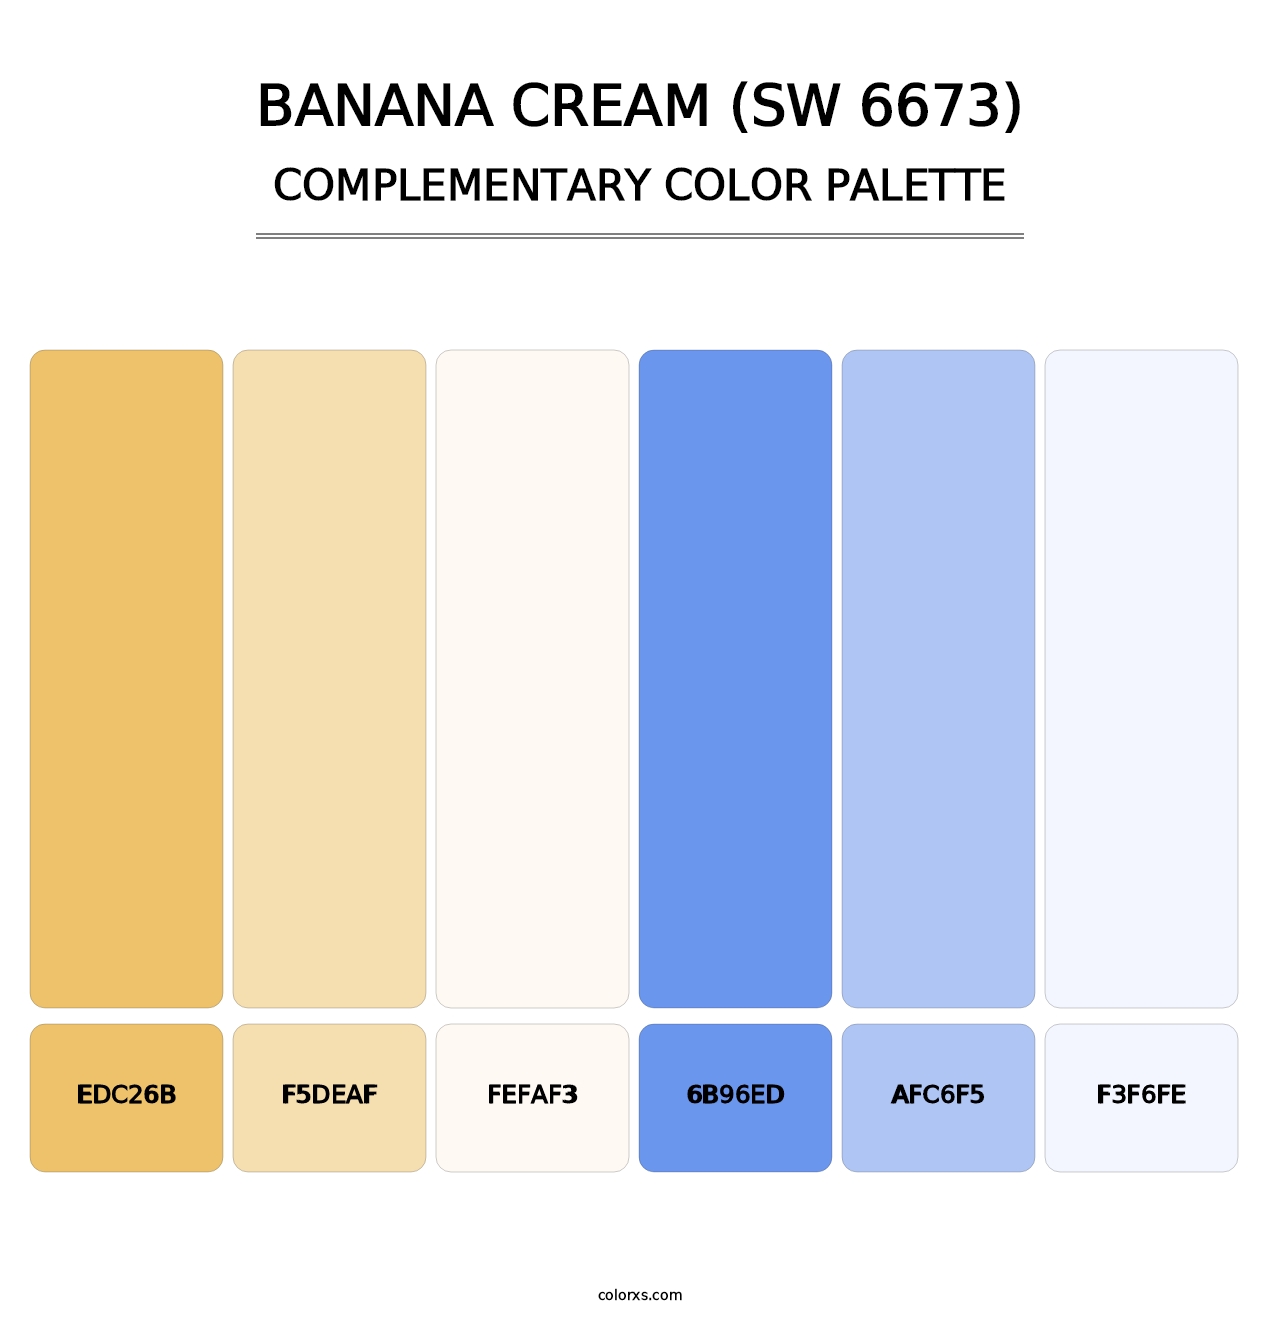 Banana Cream (SW 6673) - Complementary Color Palette